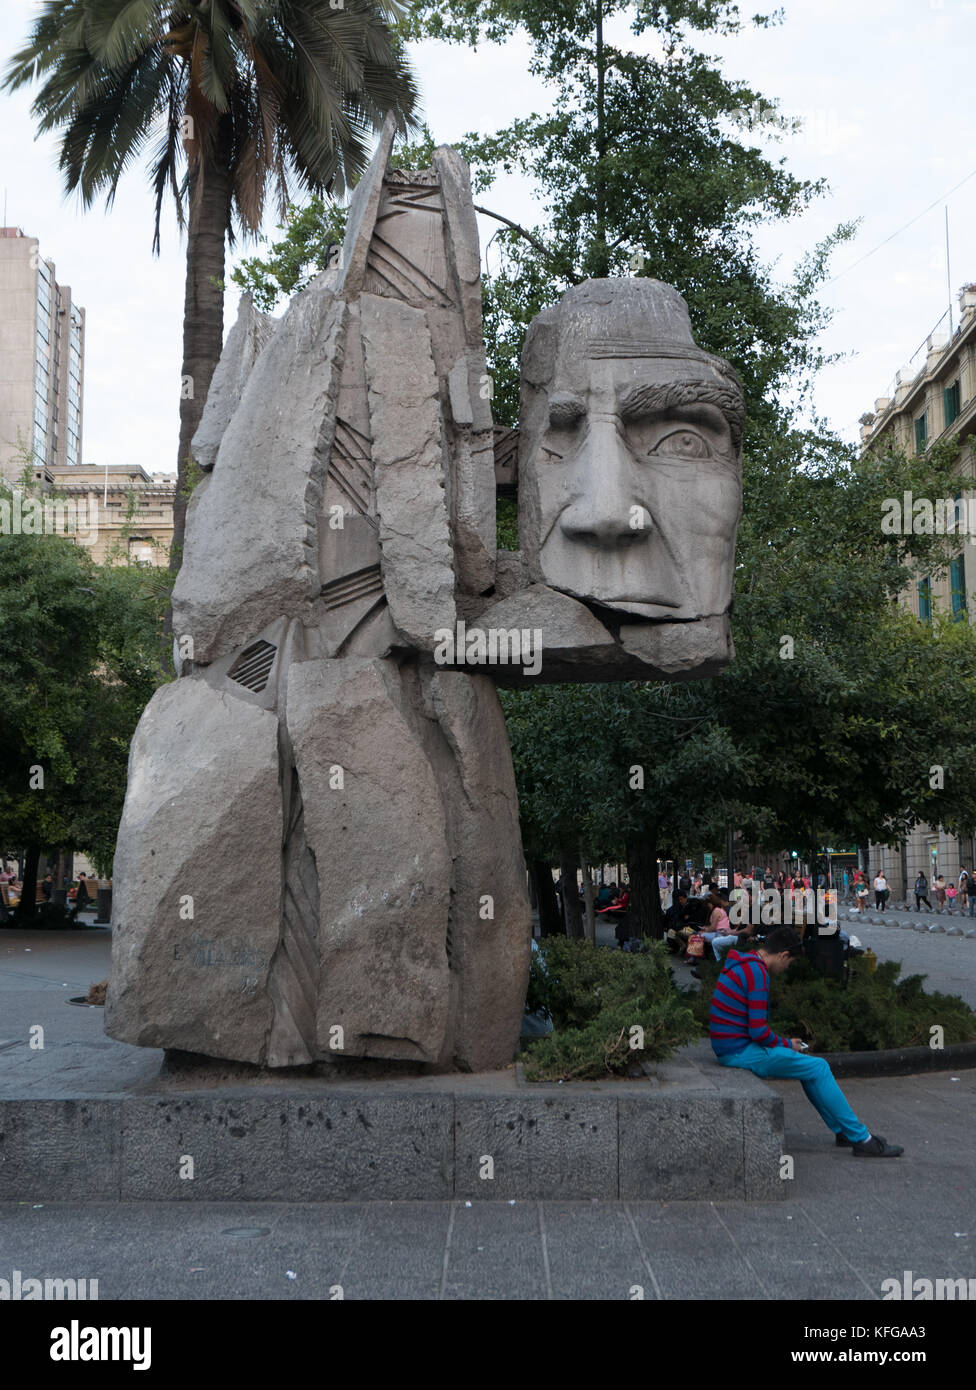 Famous statue located in the Plaza de Armas area of Santiago, Chile. Close-up of head of statue show man's face and person sitting underneath head. Stock Photo